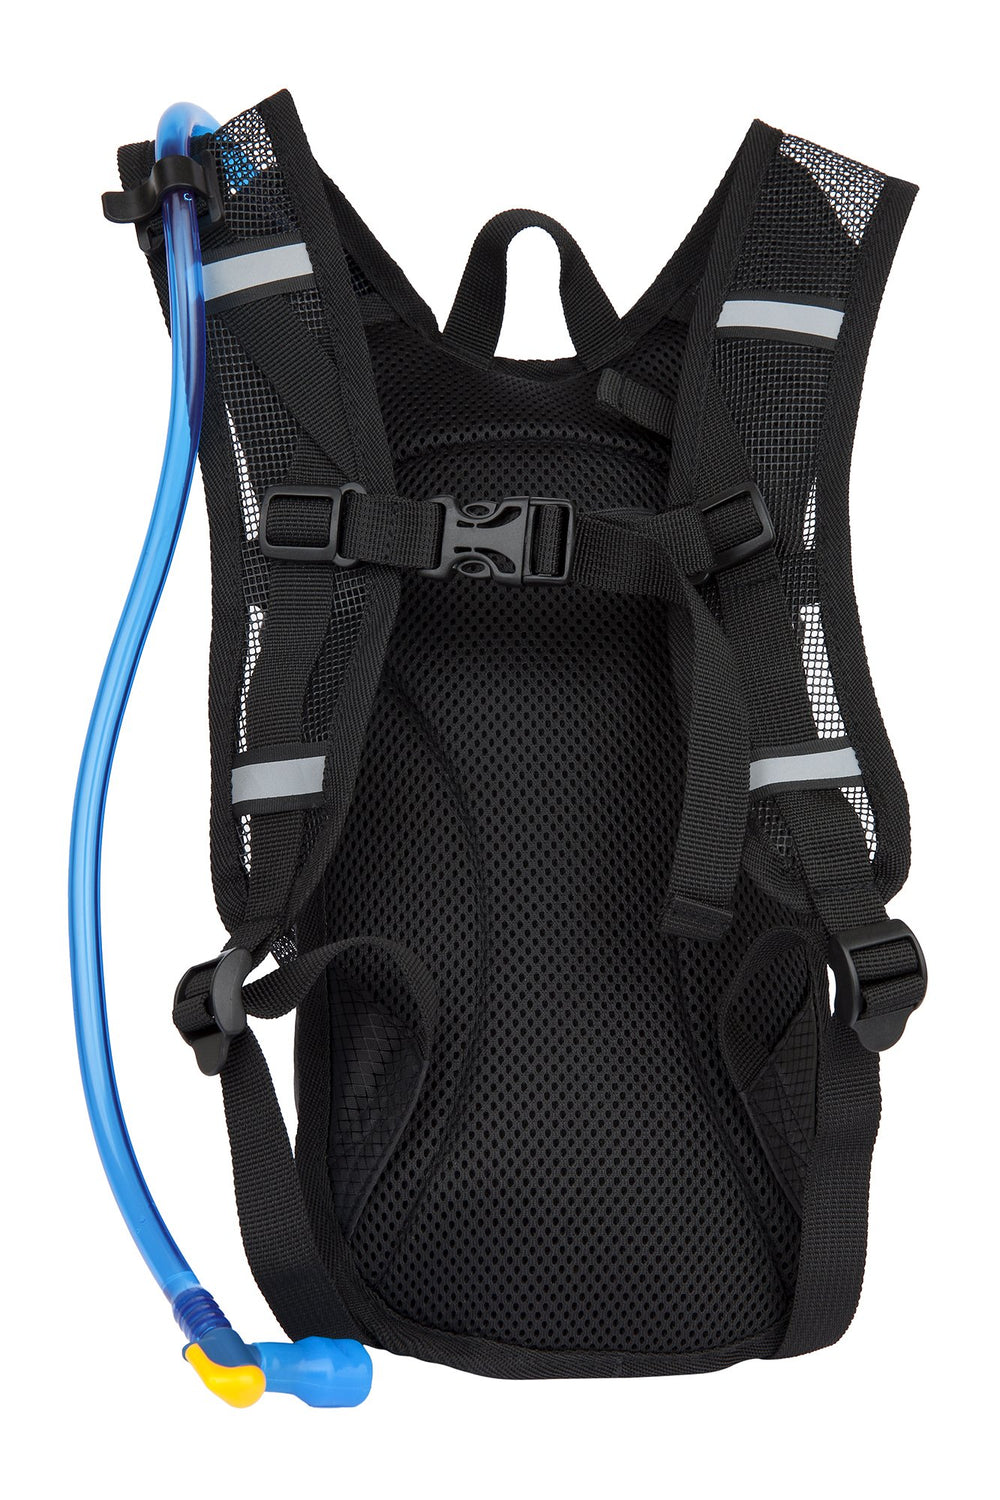 H20 Kids Hydration Backpack